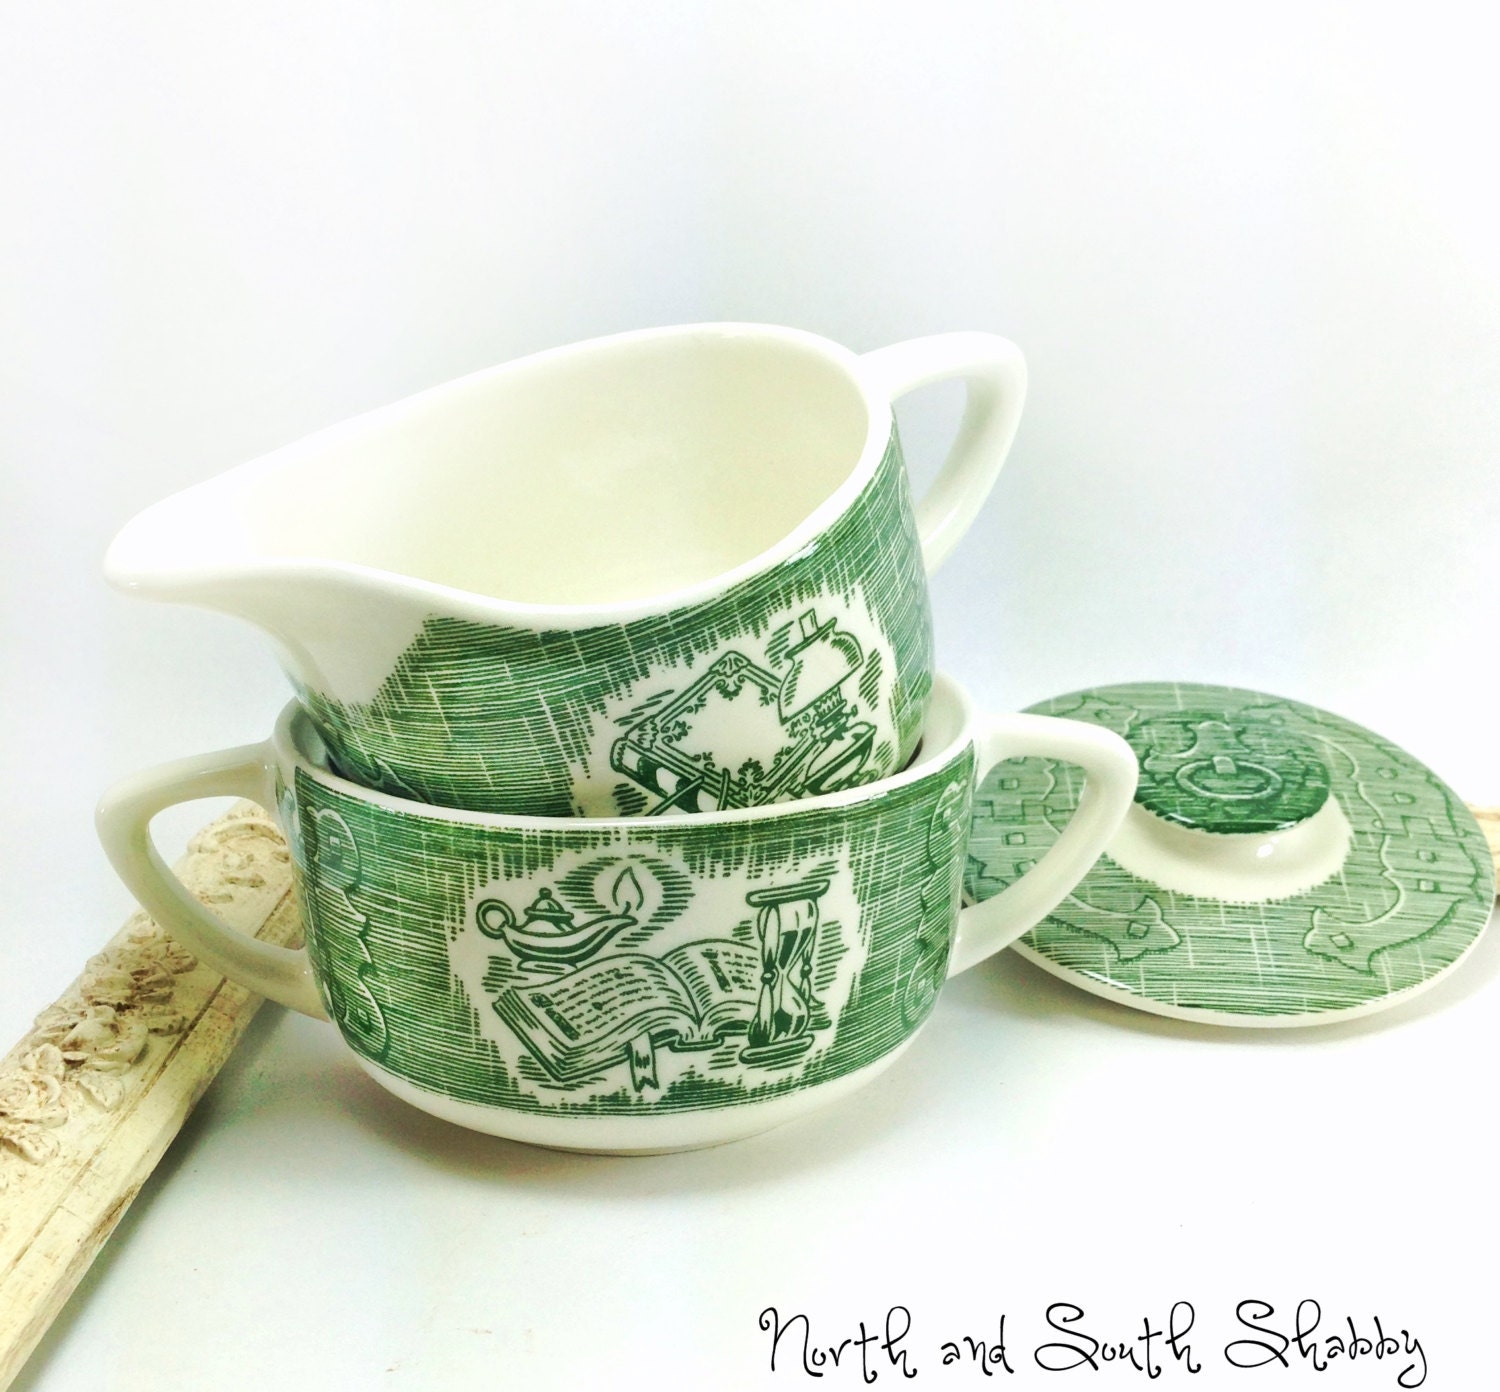 Old Curiosity Shop Lidded Sugar and Creamer Set Dickens Inspired Vintage Transferware Serveware by Royal China - northandsouthshabby